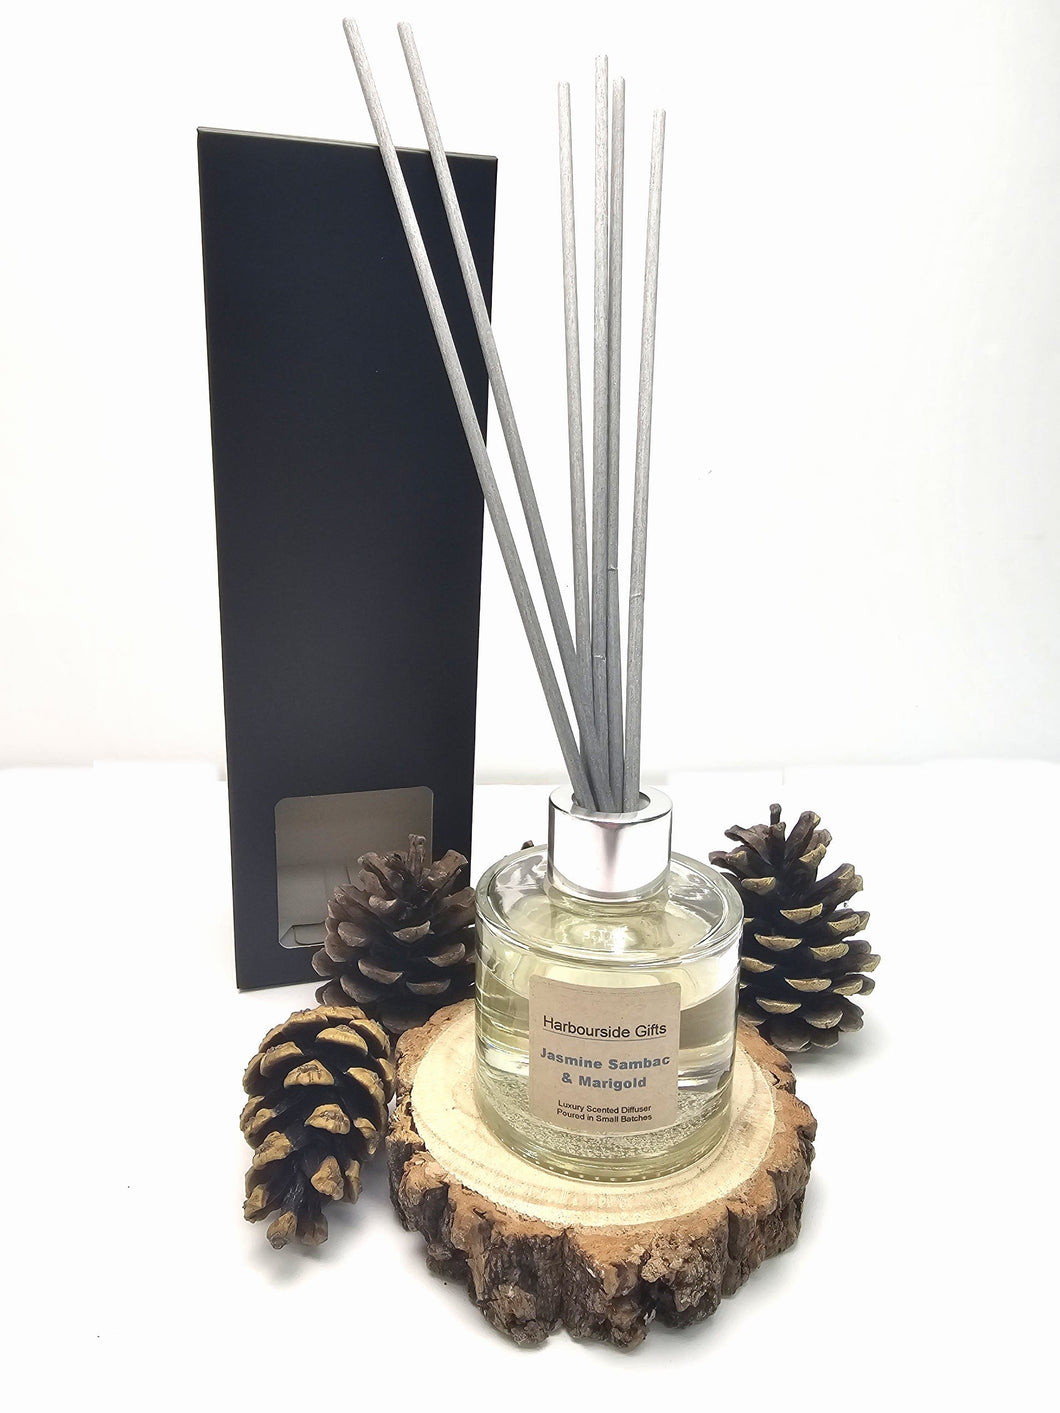 Jasmine Sambac & Marigold Oil Reed Diffuser 100ml with 6 High Quality Reeds in Gift Box JSMDIFF100 Harbourside Gifts